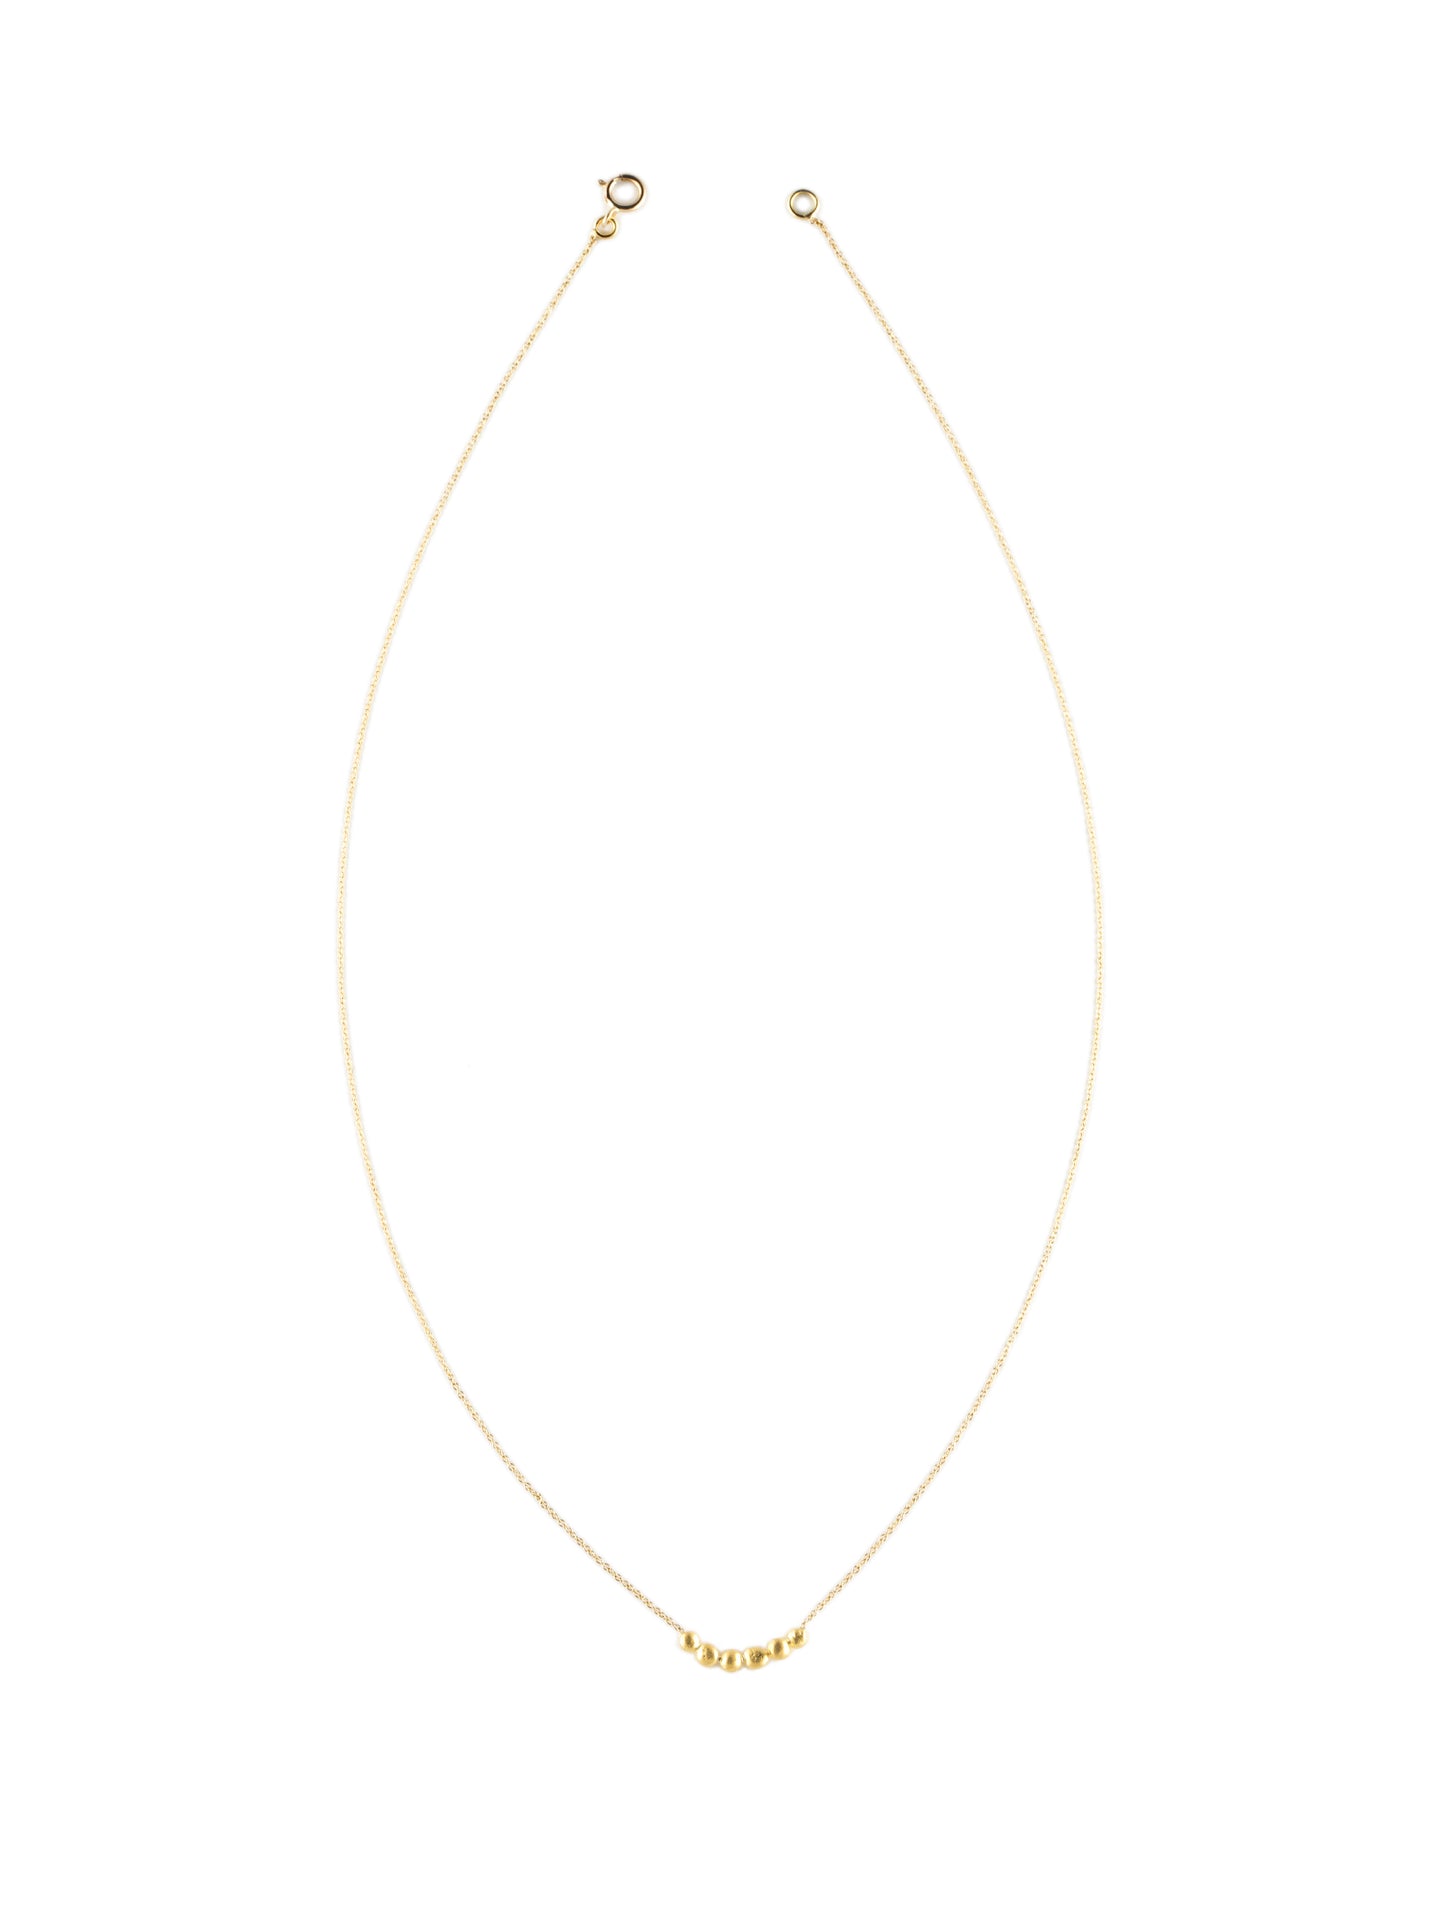 SIX GOLD NUGGETS NECKLACE